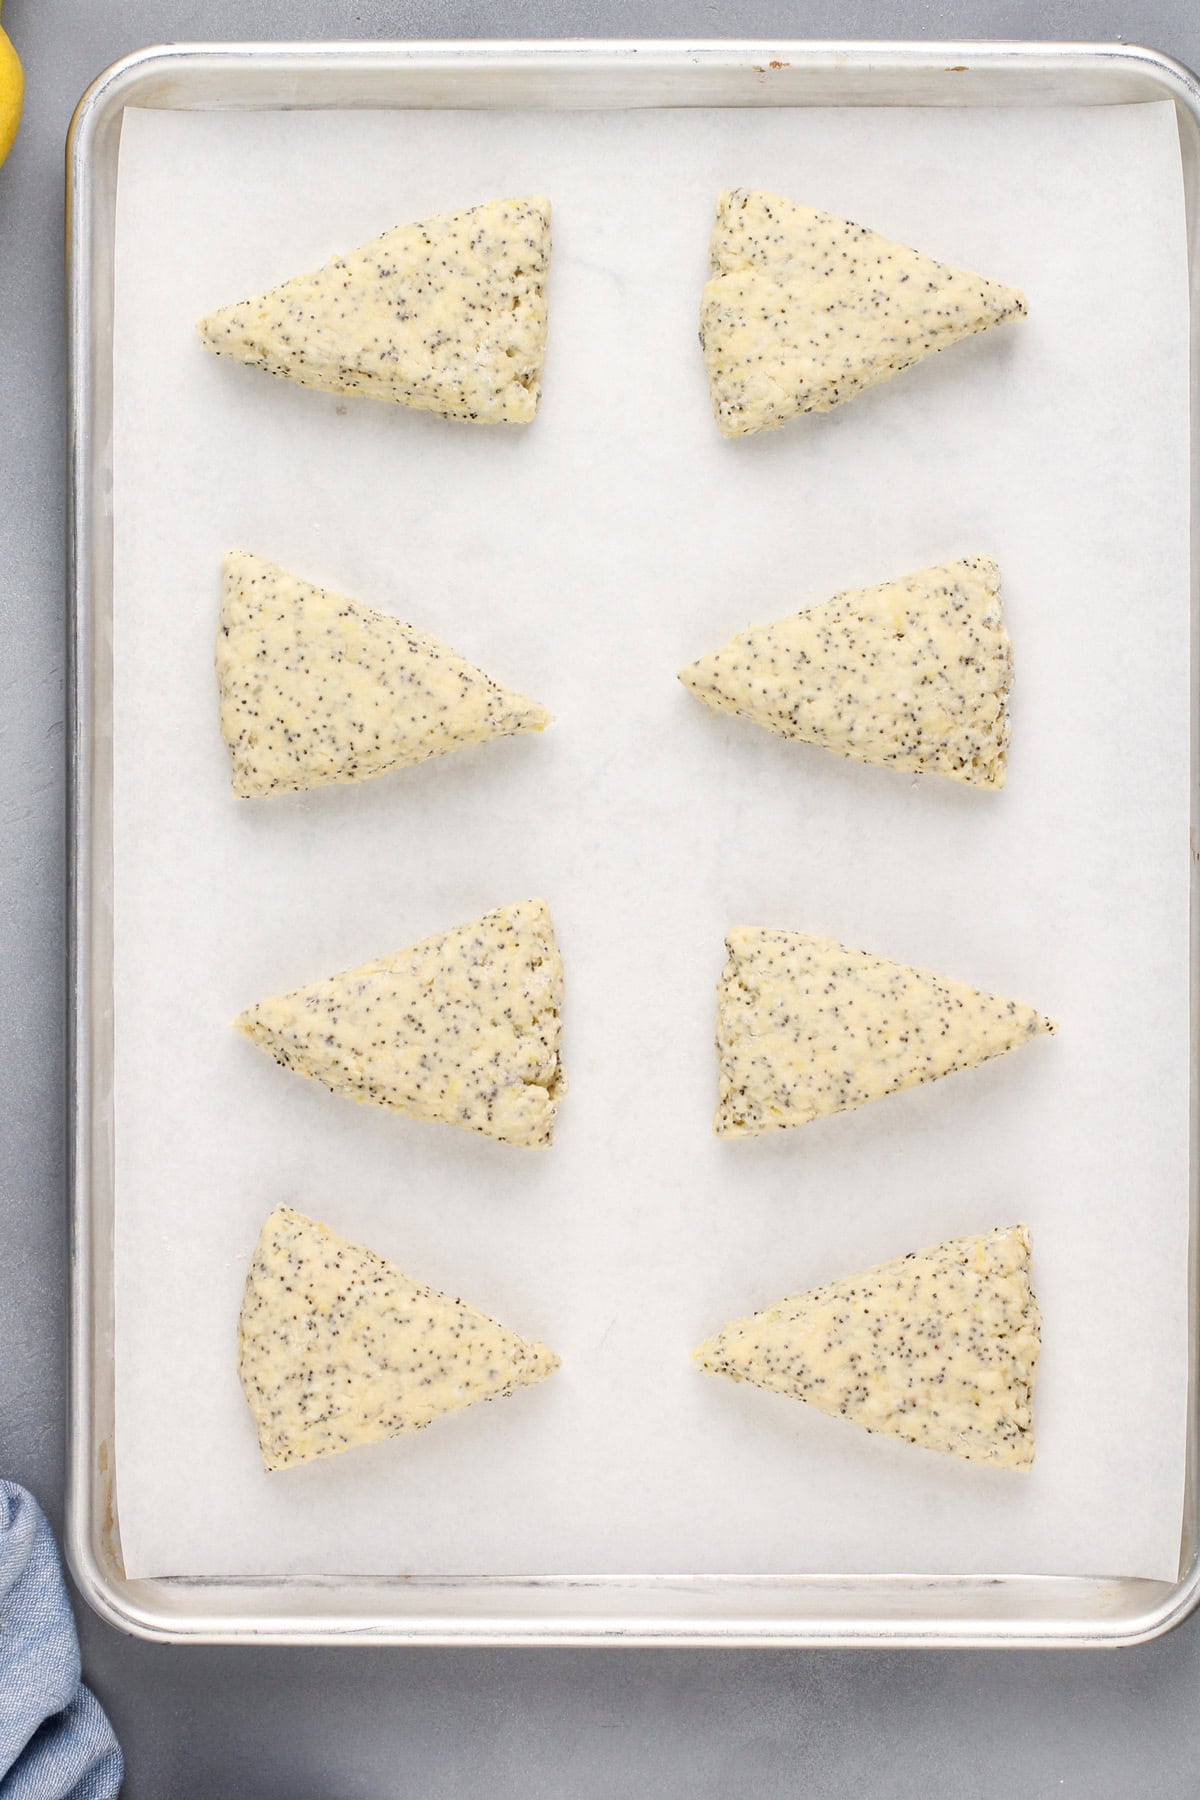 Unbaked lemon poppy seed scones on a lined baking sheet, ready to go in the oven.